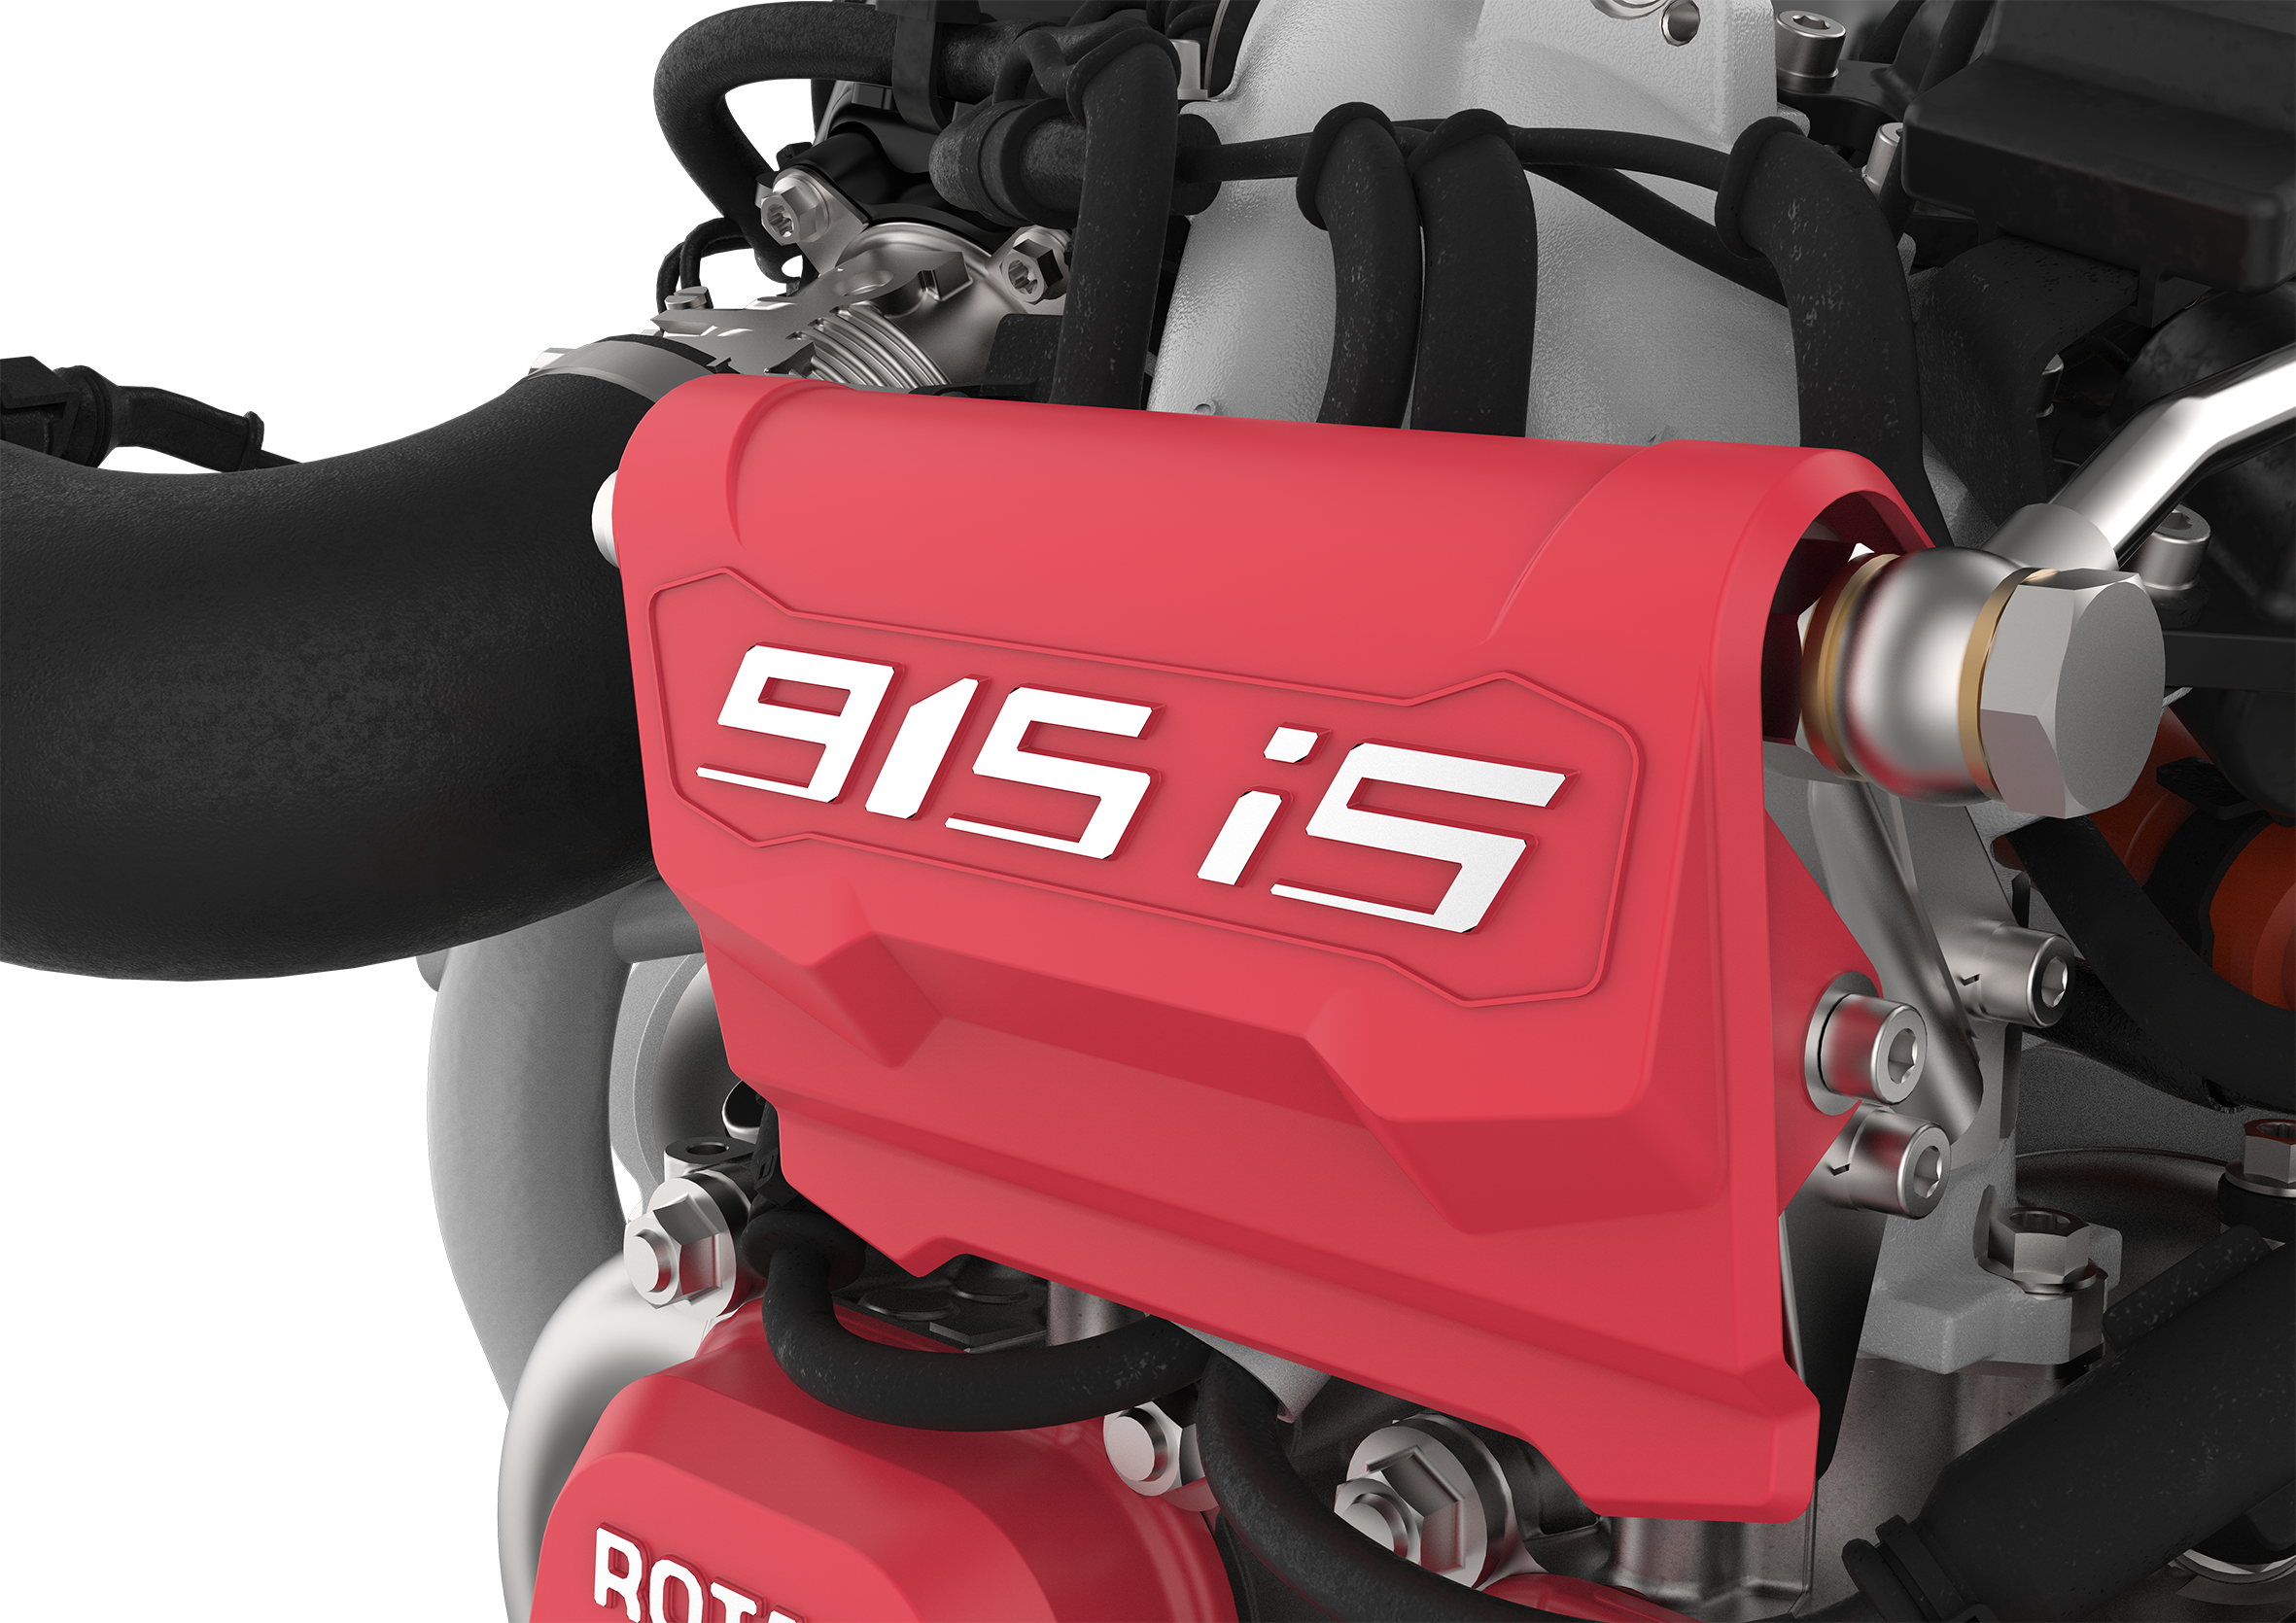 Rotax aircraft engine 915i S limited edition 2